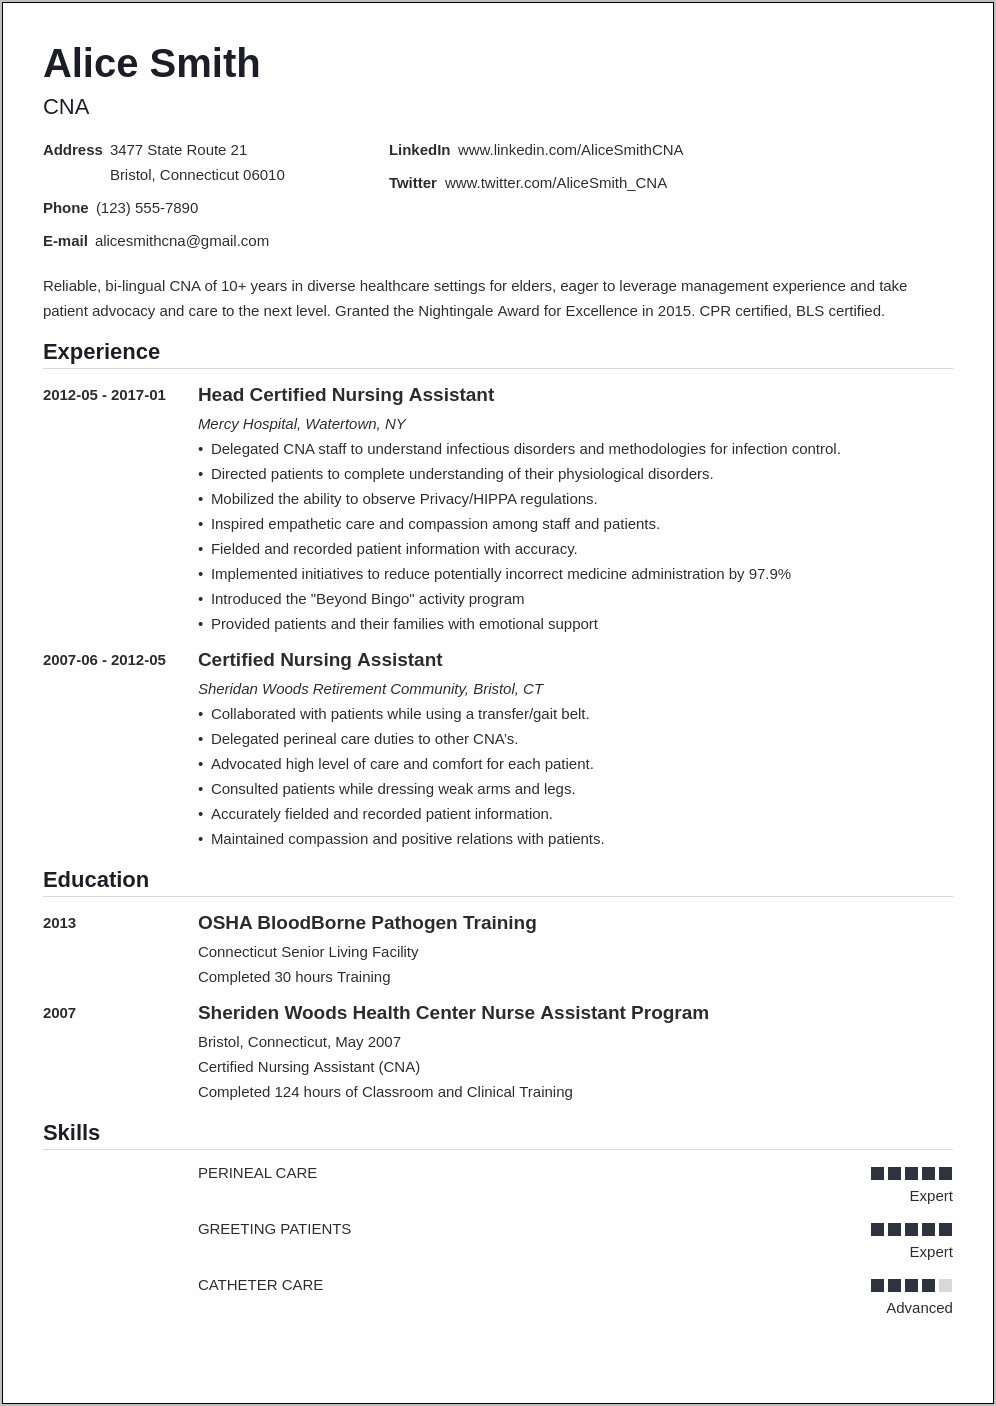 Example Cna Resume For Hospital Position